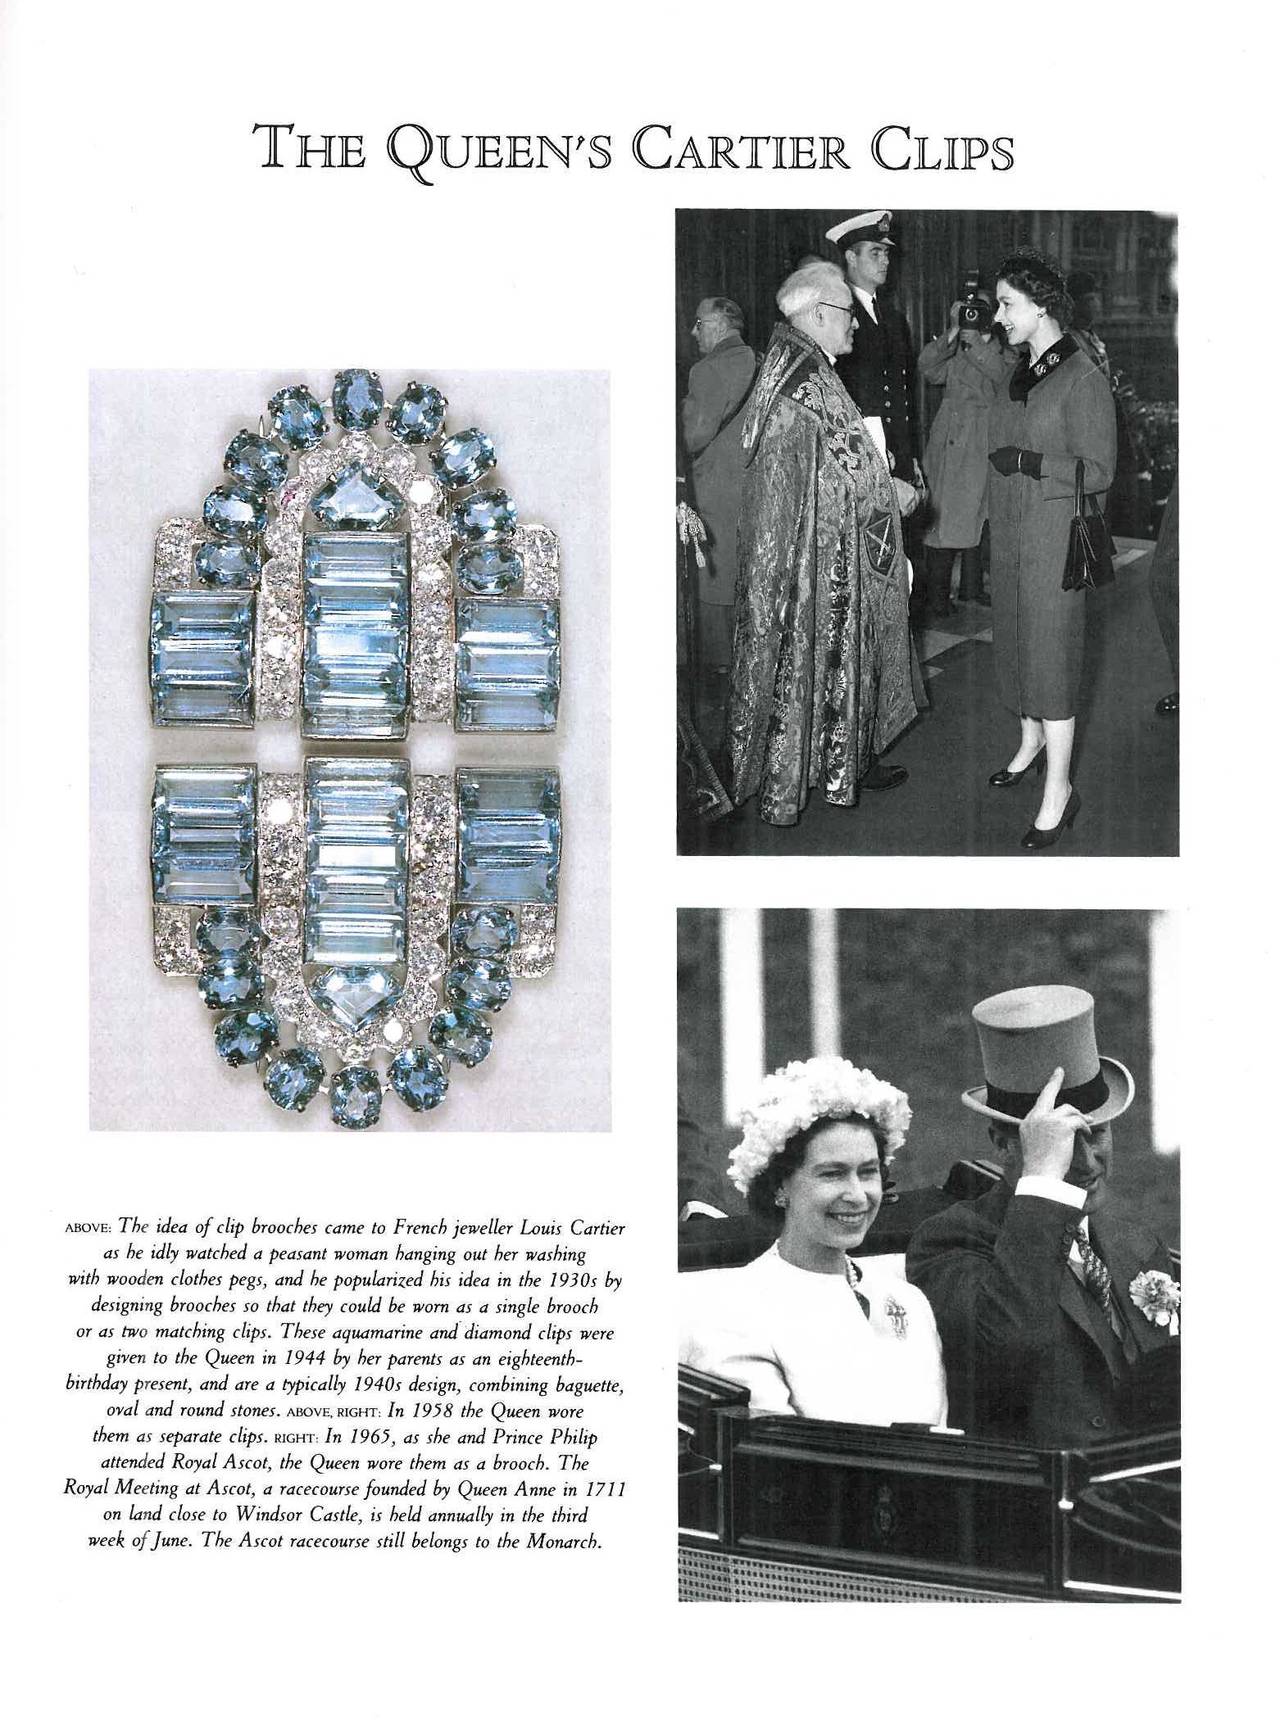 This lovely book details some of the jewels in what is surely one of the world's greatest collection of jewels and jewellery which has been put together over many generations. As well as inheriting, each queen has added one way or another to this